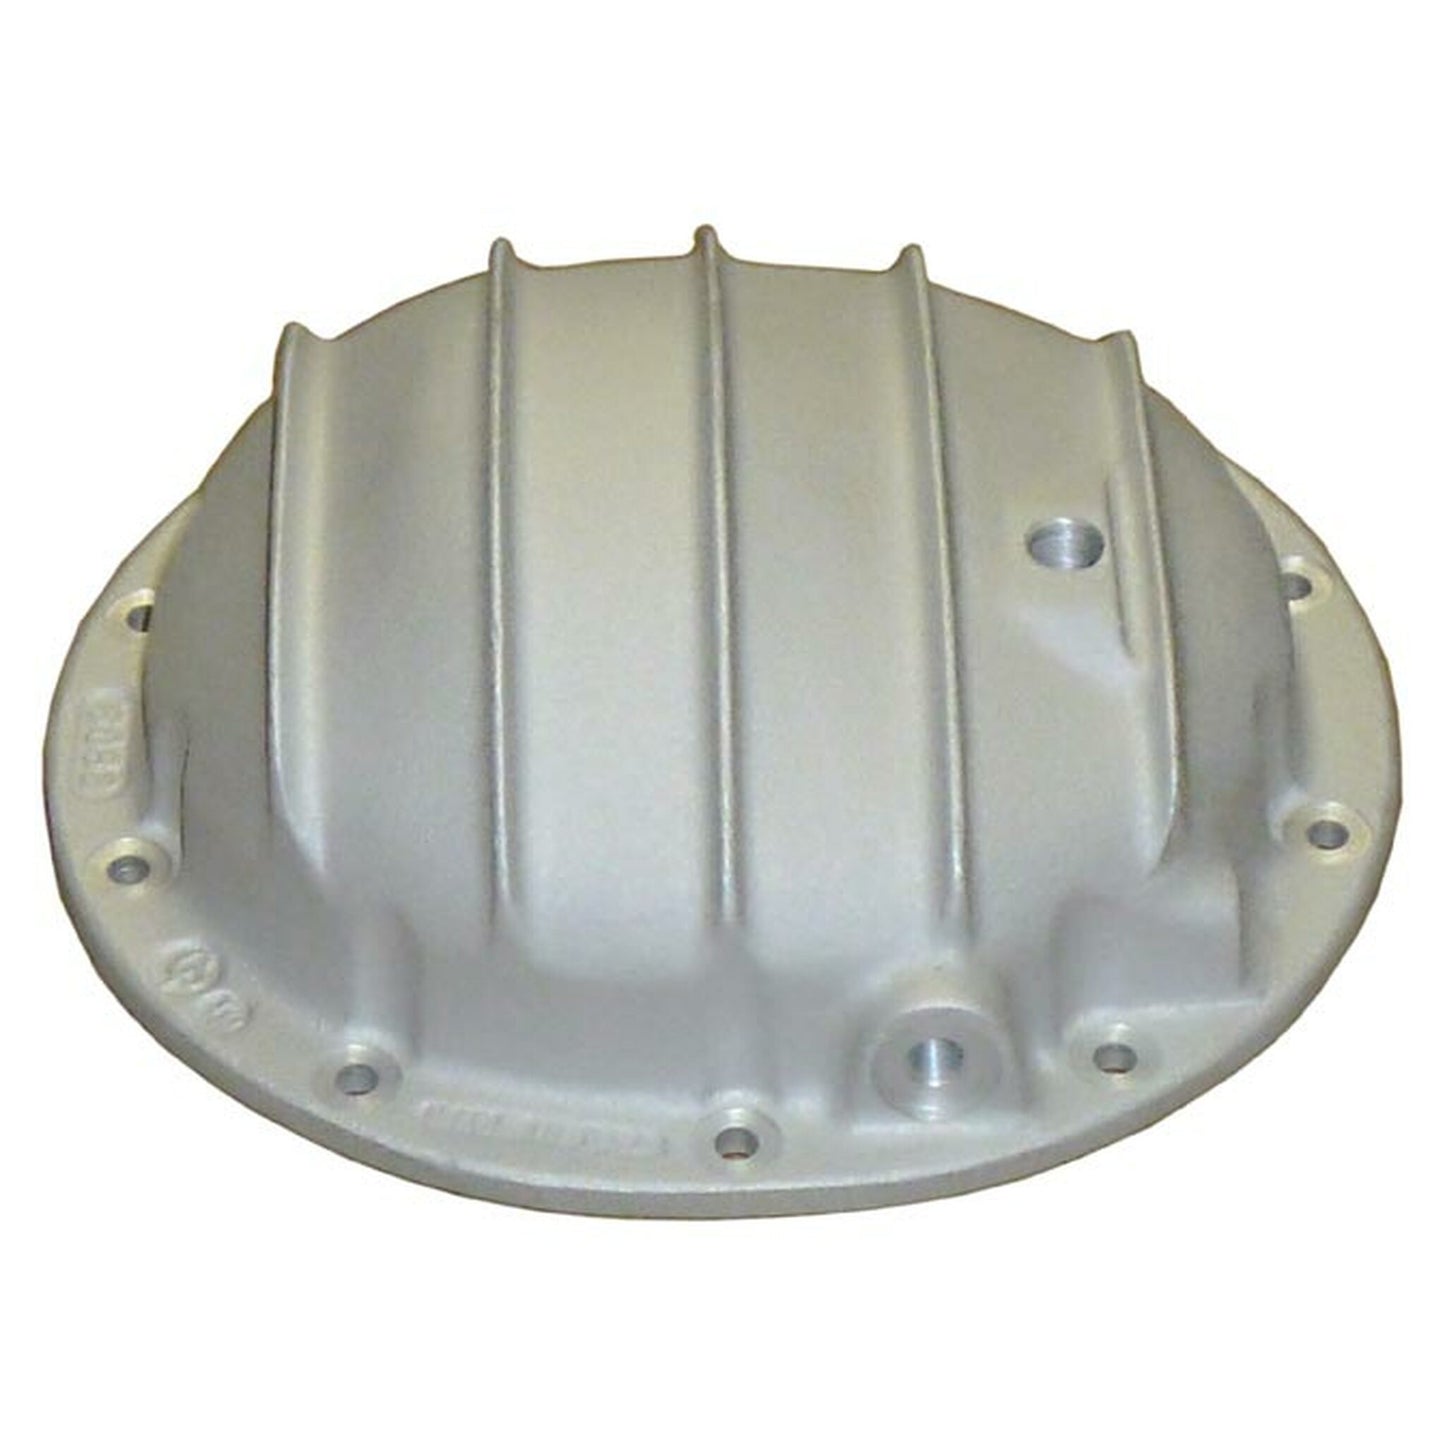 GM 8.5"/8.625" Rear Differential Cover, 10 Bolt, Vertical Fins